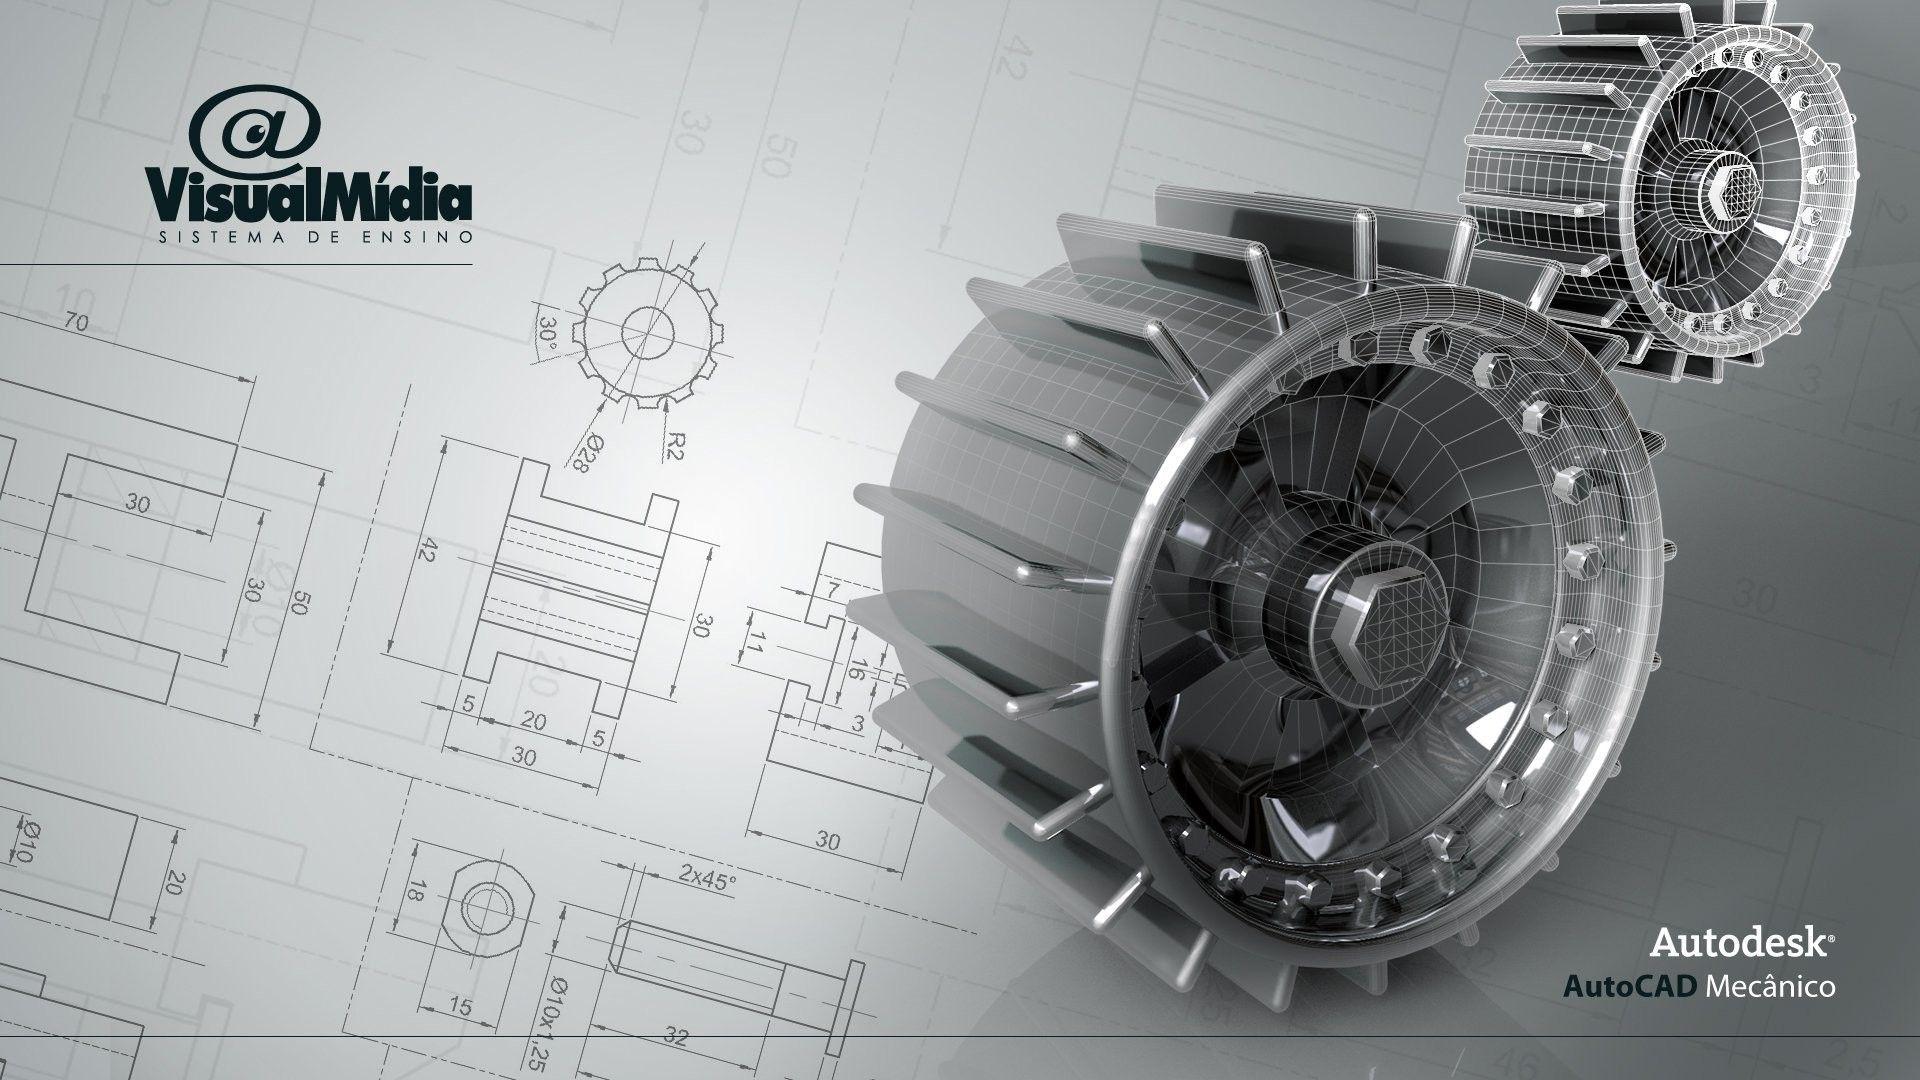 Free HD Engineering Wallpaper For Download. Mechanical design, Drawing wallpaper, Technical drawing